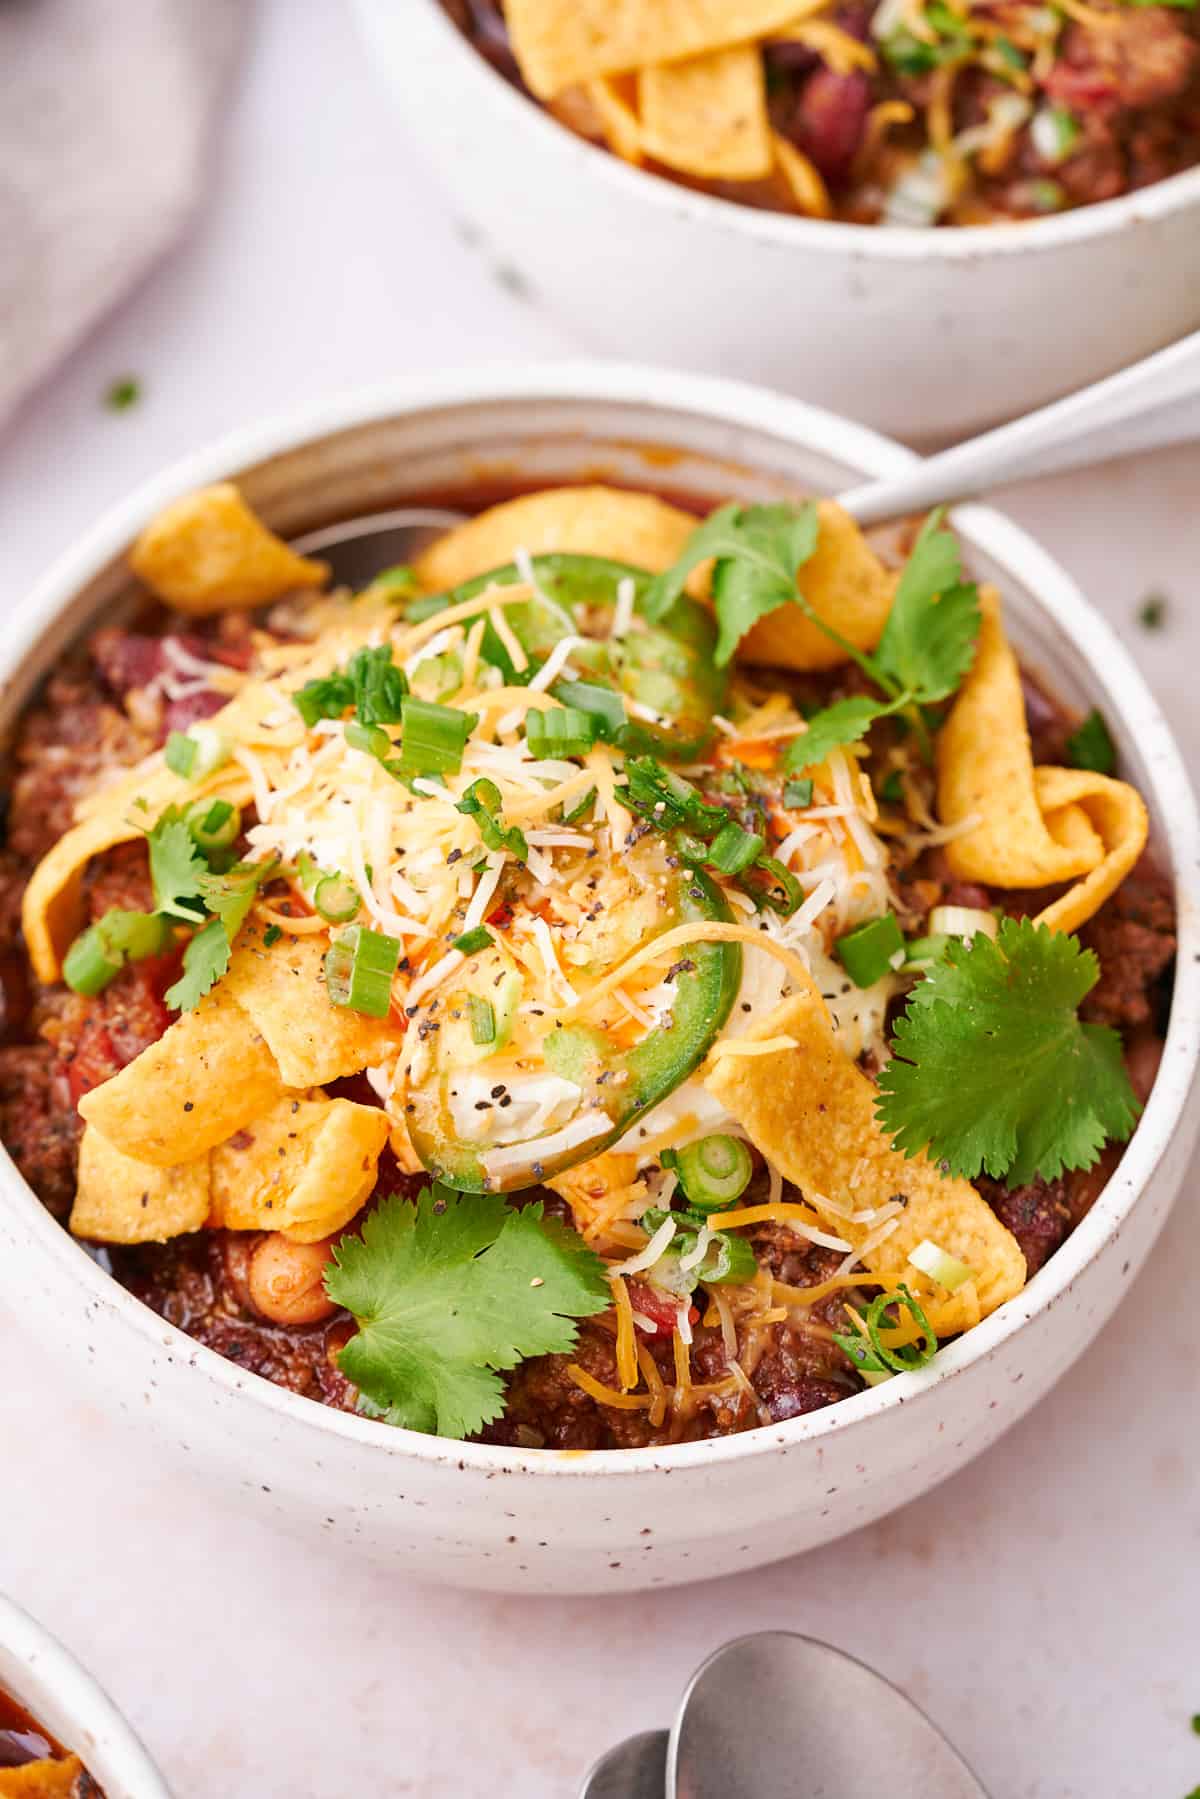 Chili in a bowl with various personalized toppings.